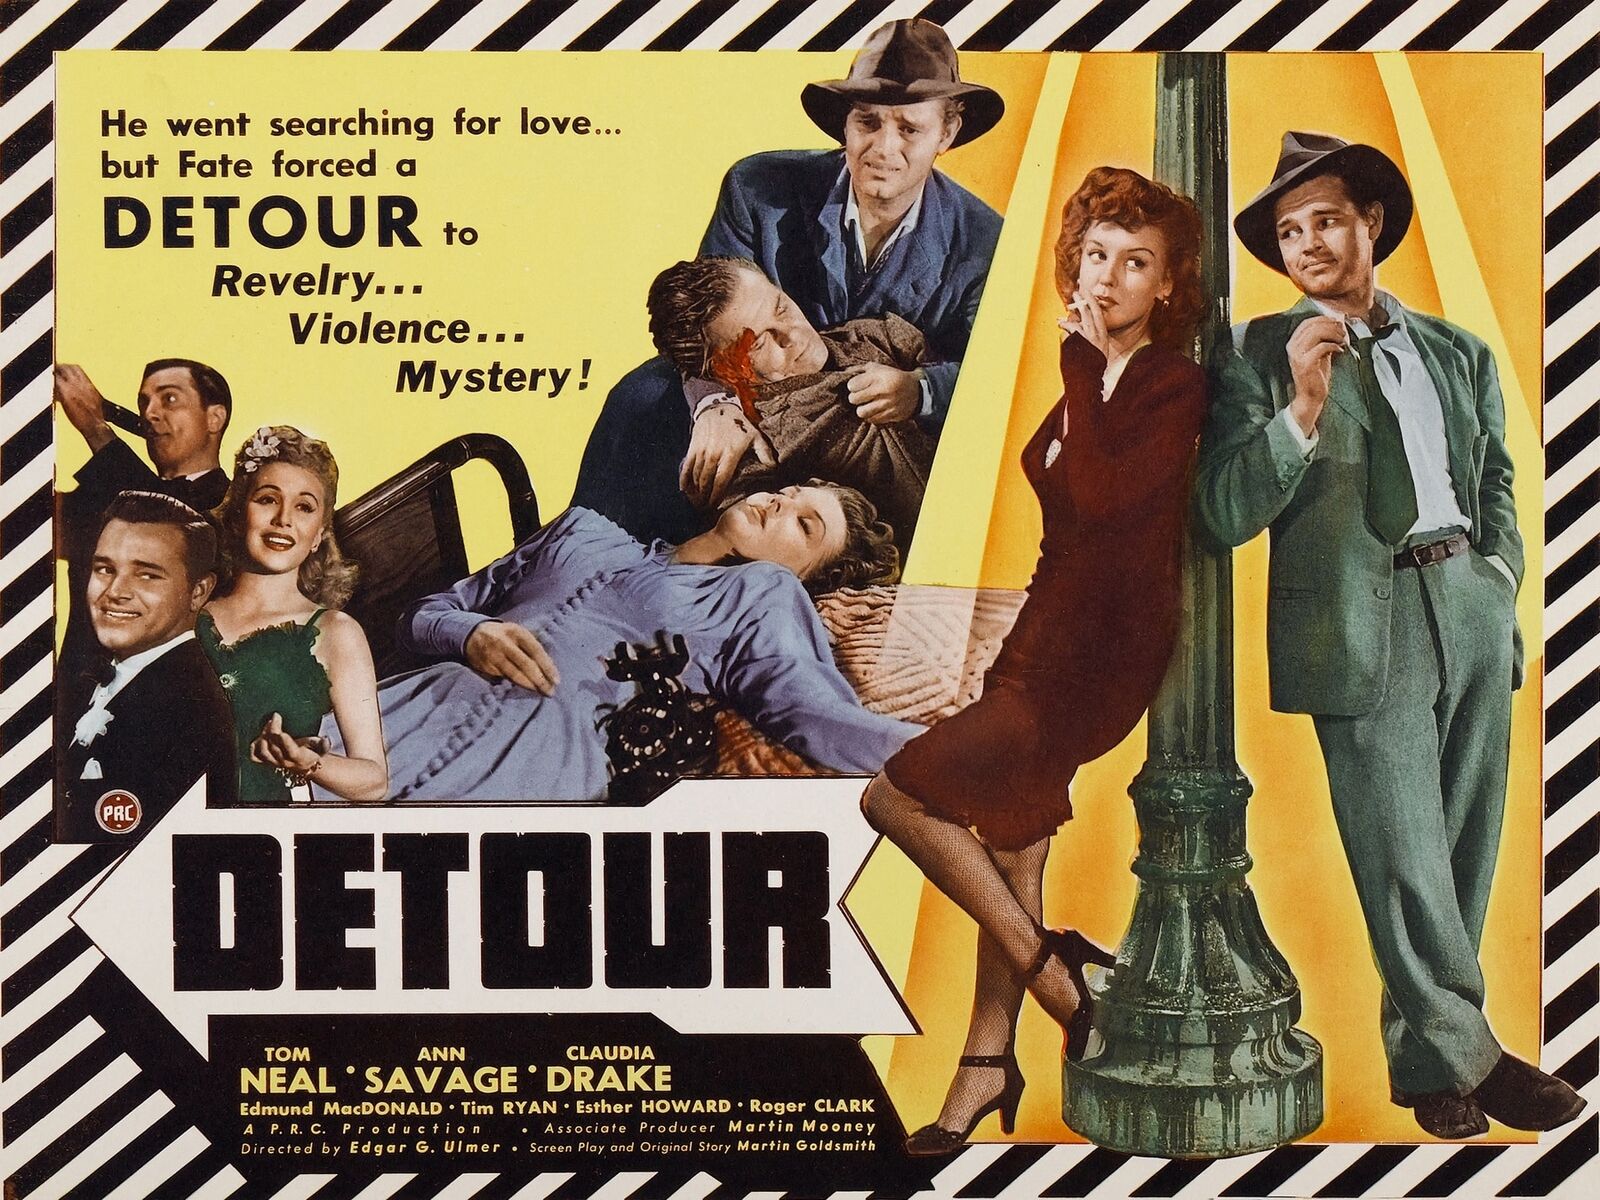 Graphic image of the movie poster for Detour